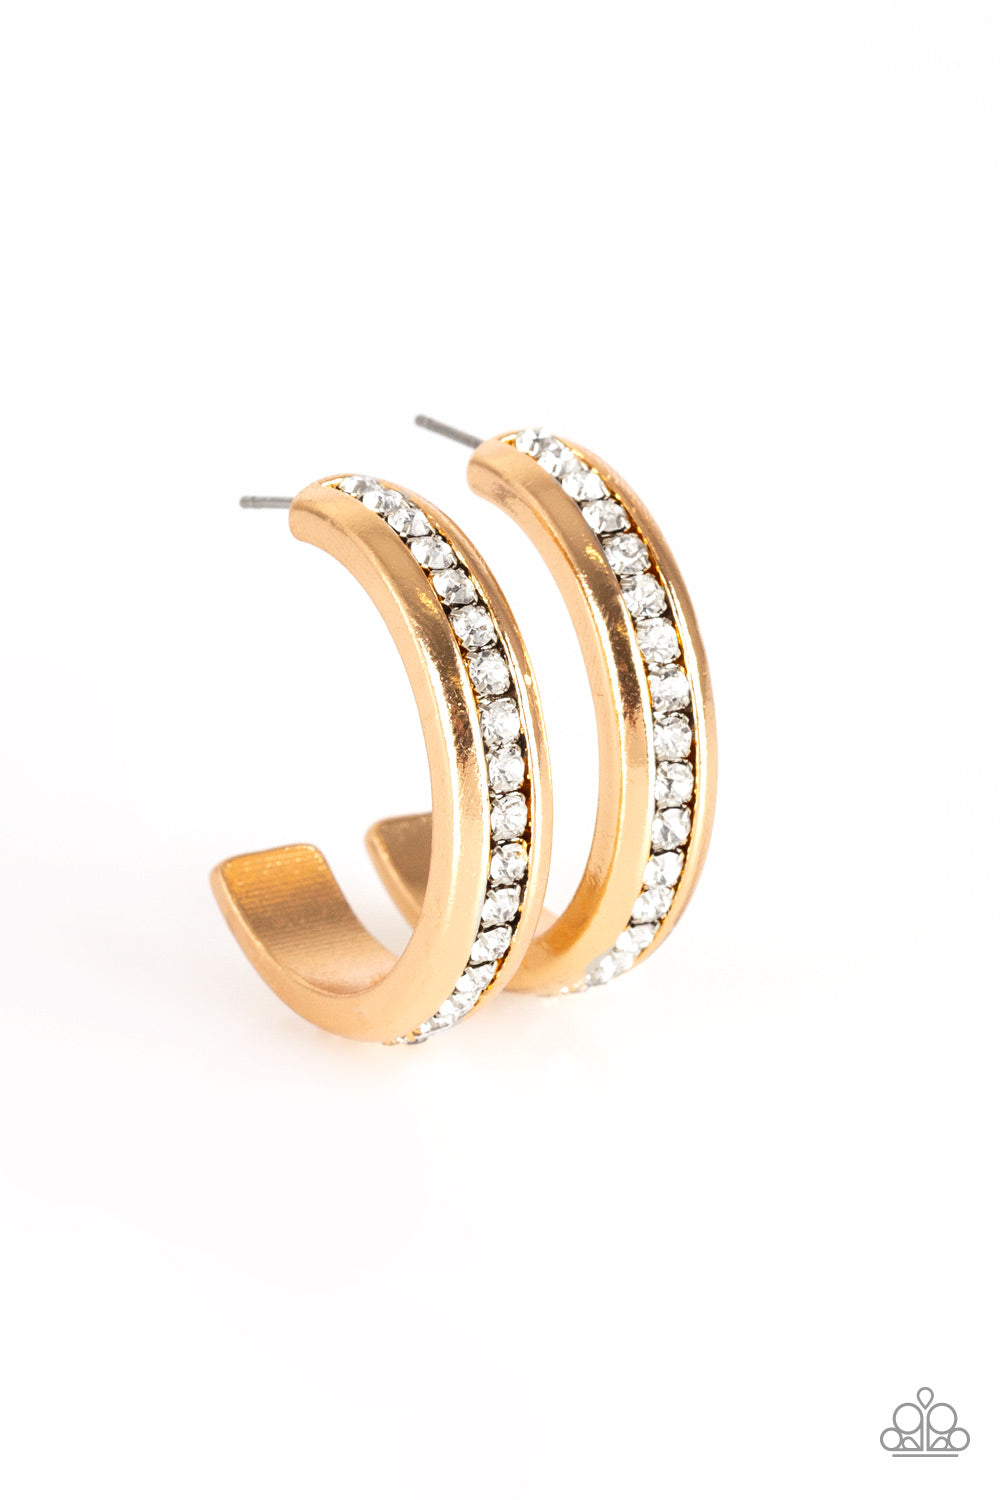 5TH AVENUE FASHIONISTA - GOLD POST HOOP EARRING